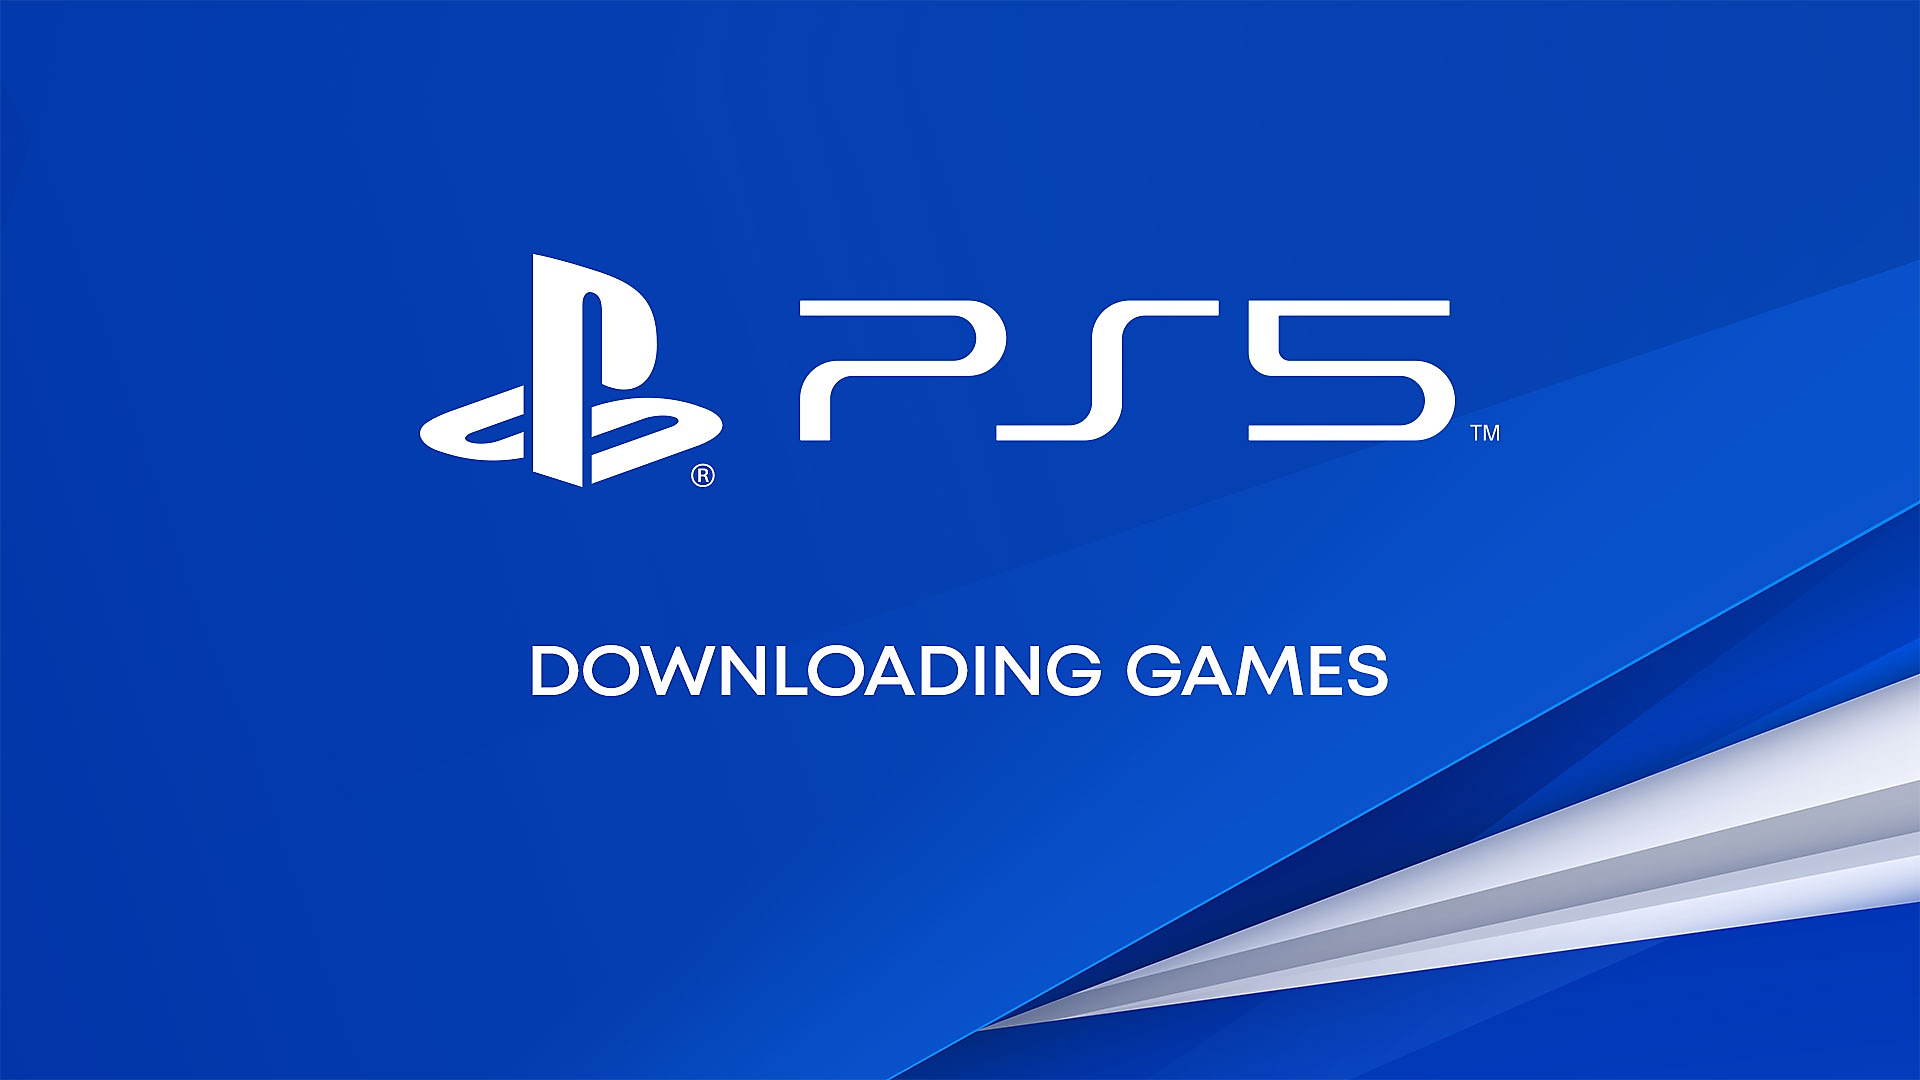 How to download games on your PS5 console